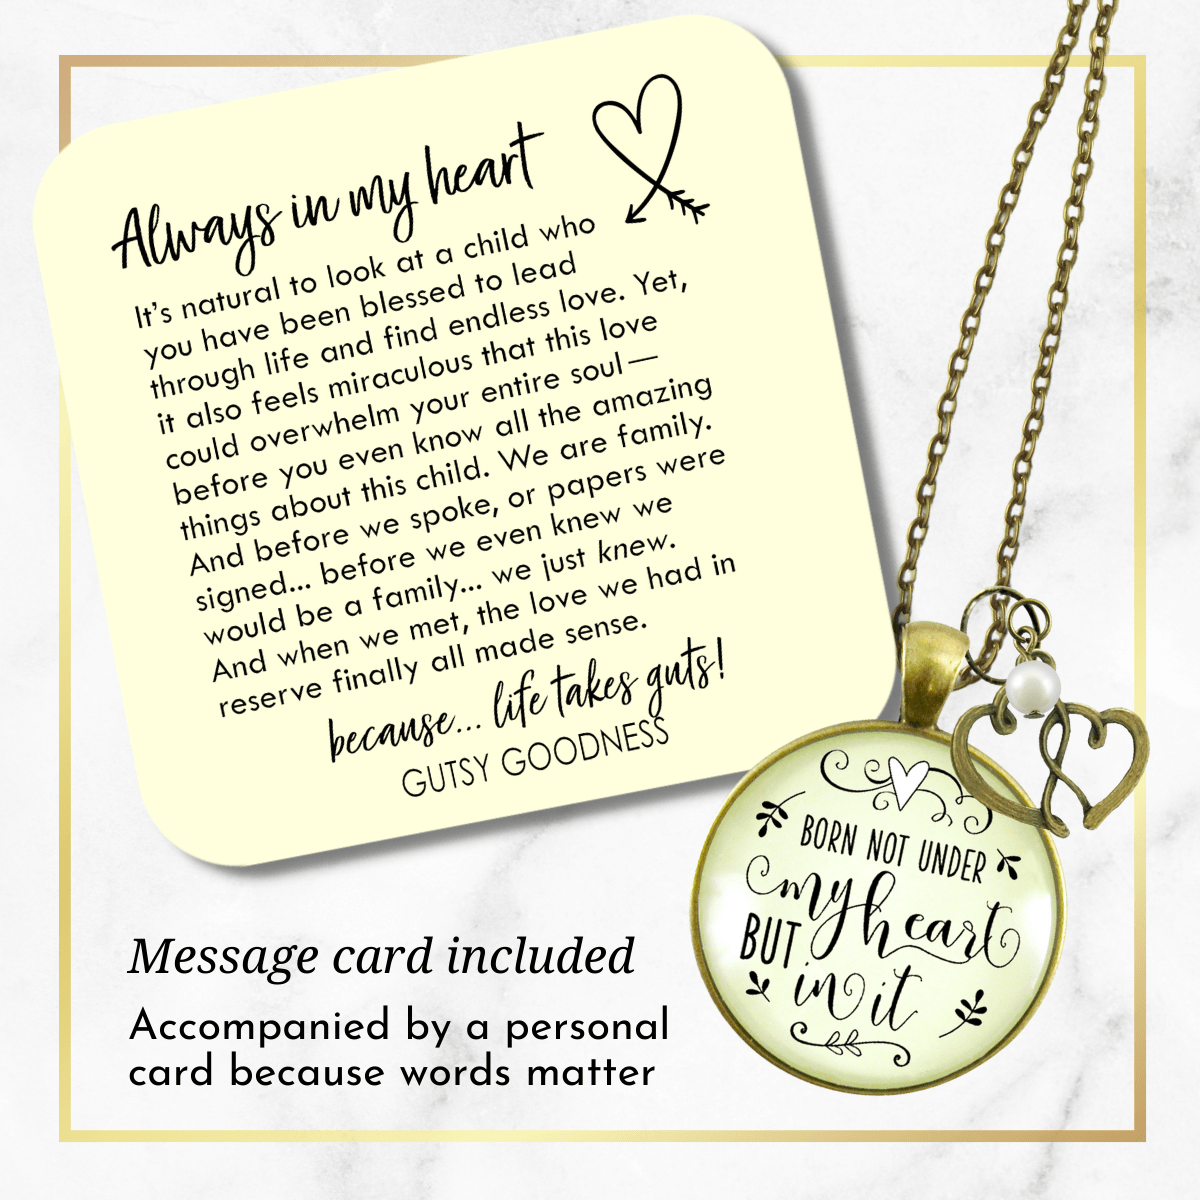 Gutsy Goodness Adoption Necklace Born Not Under My Heart Special Mom Jewelry Gift - Gutsy Goodness Handmade Jewelry;Born Not Under My Heart But In It - Gutsy Goodness Handmade Jewelry Gifts